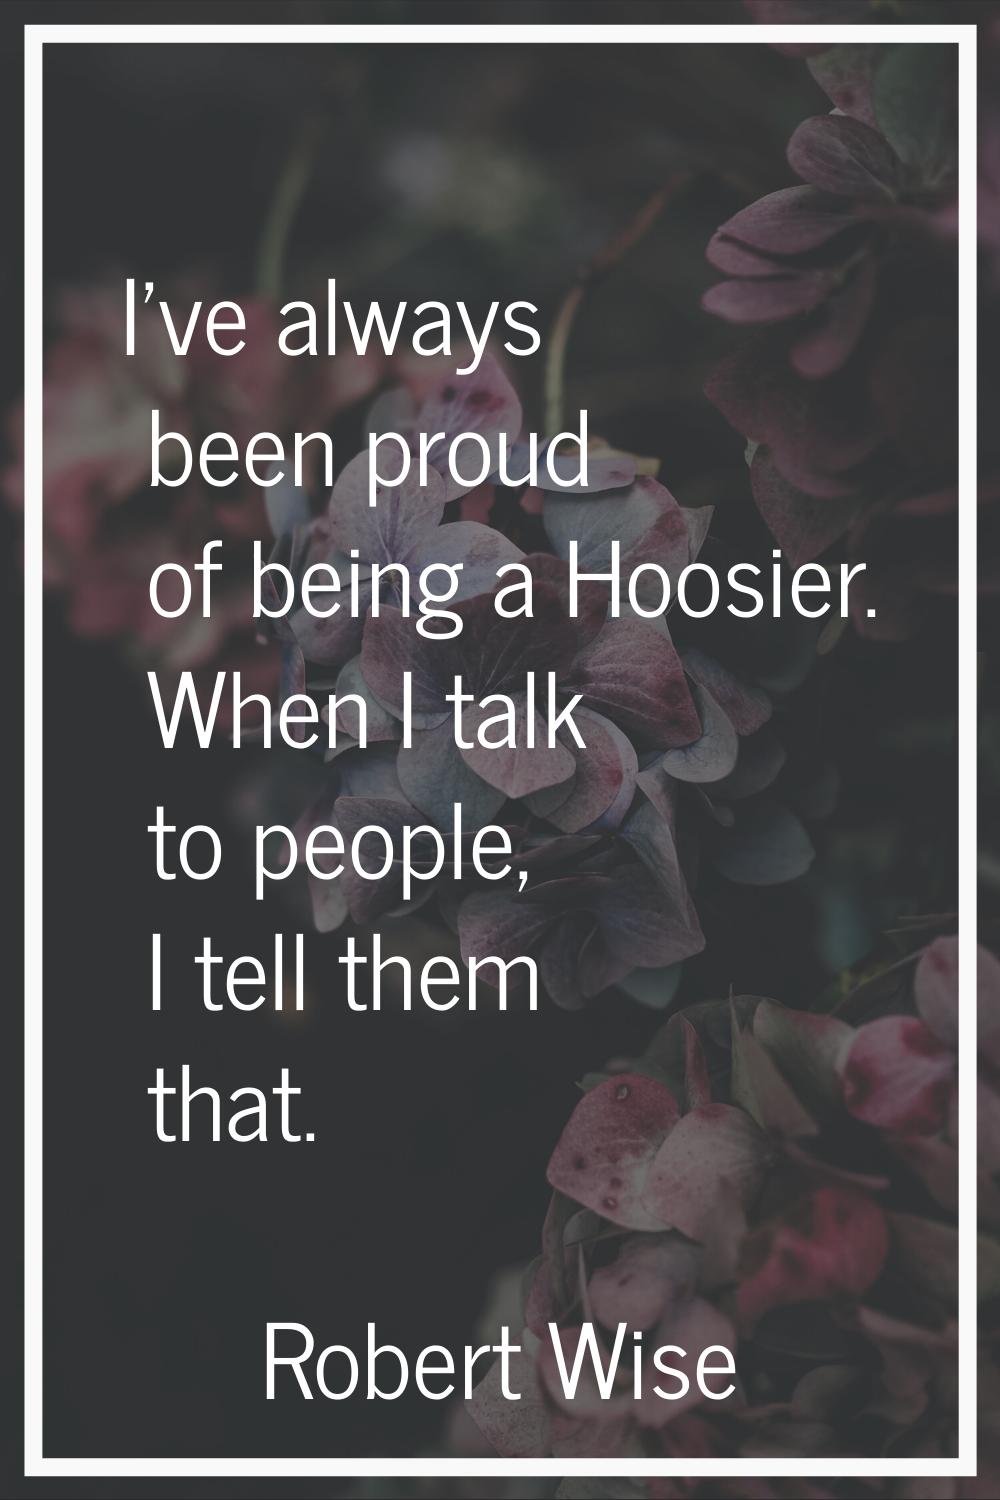 I've always been proud of being a Hoosier. When I talk to people, I tell them that.